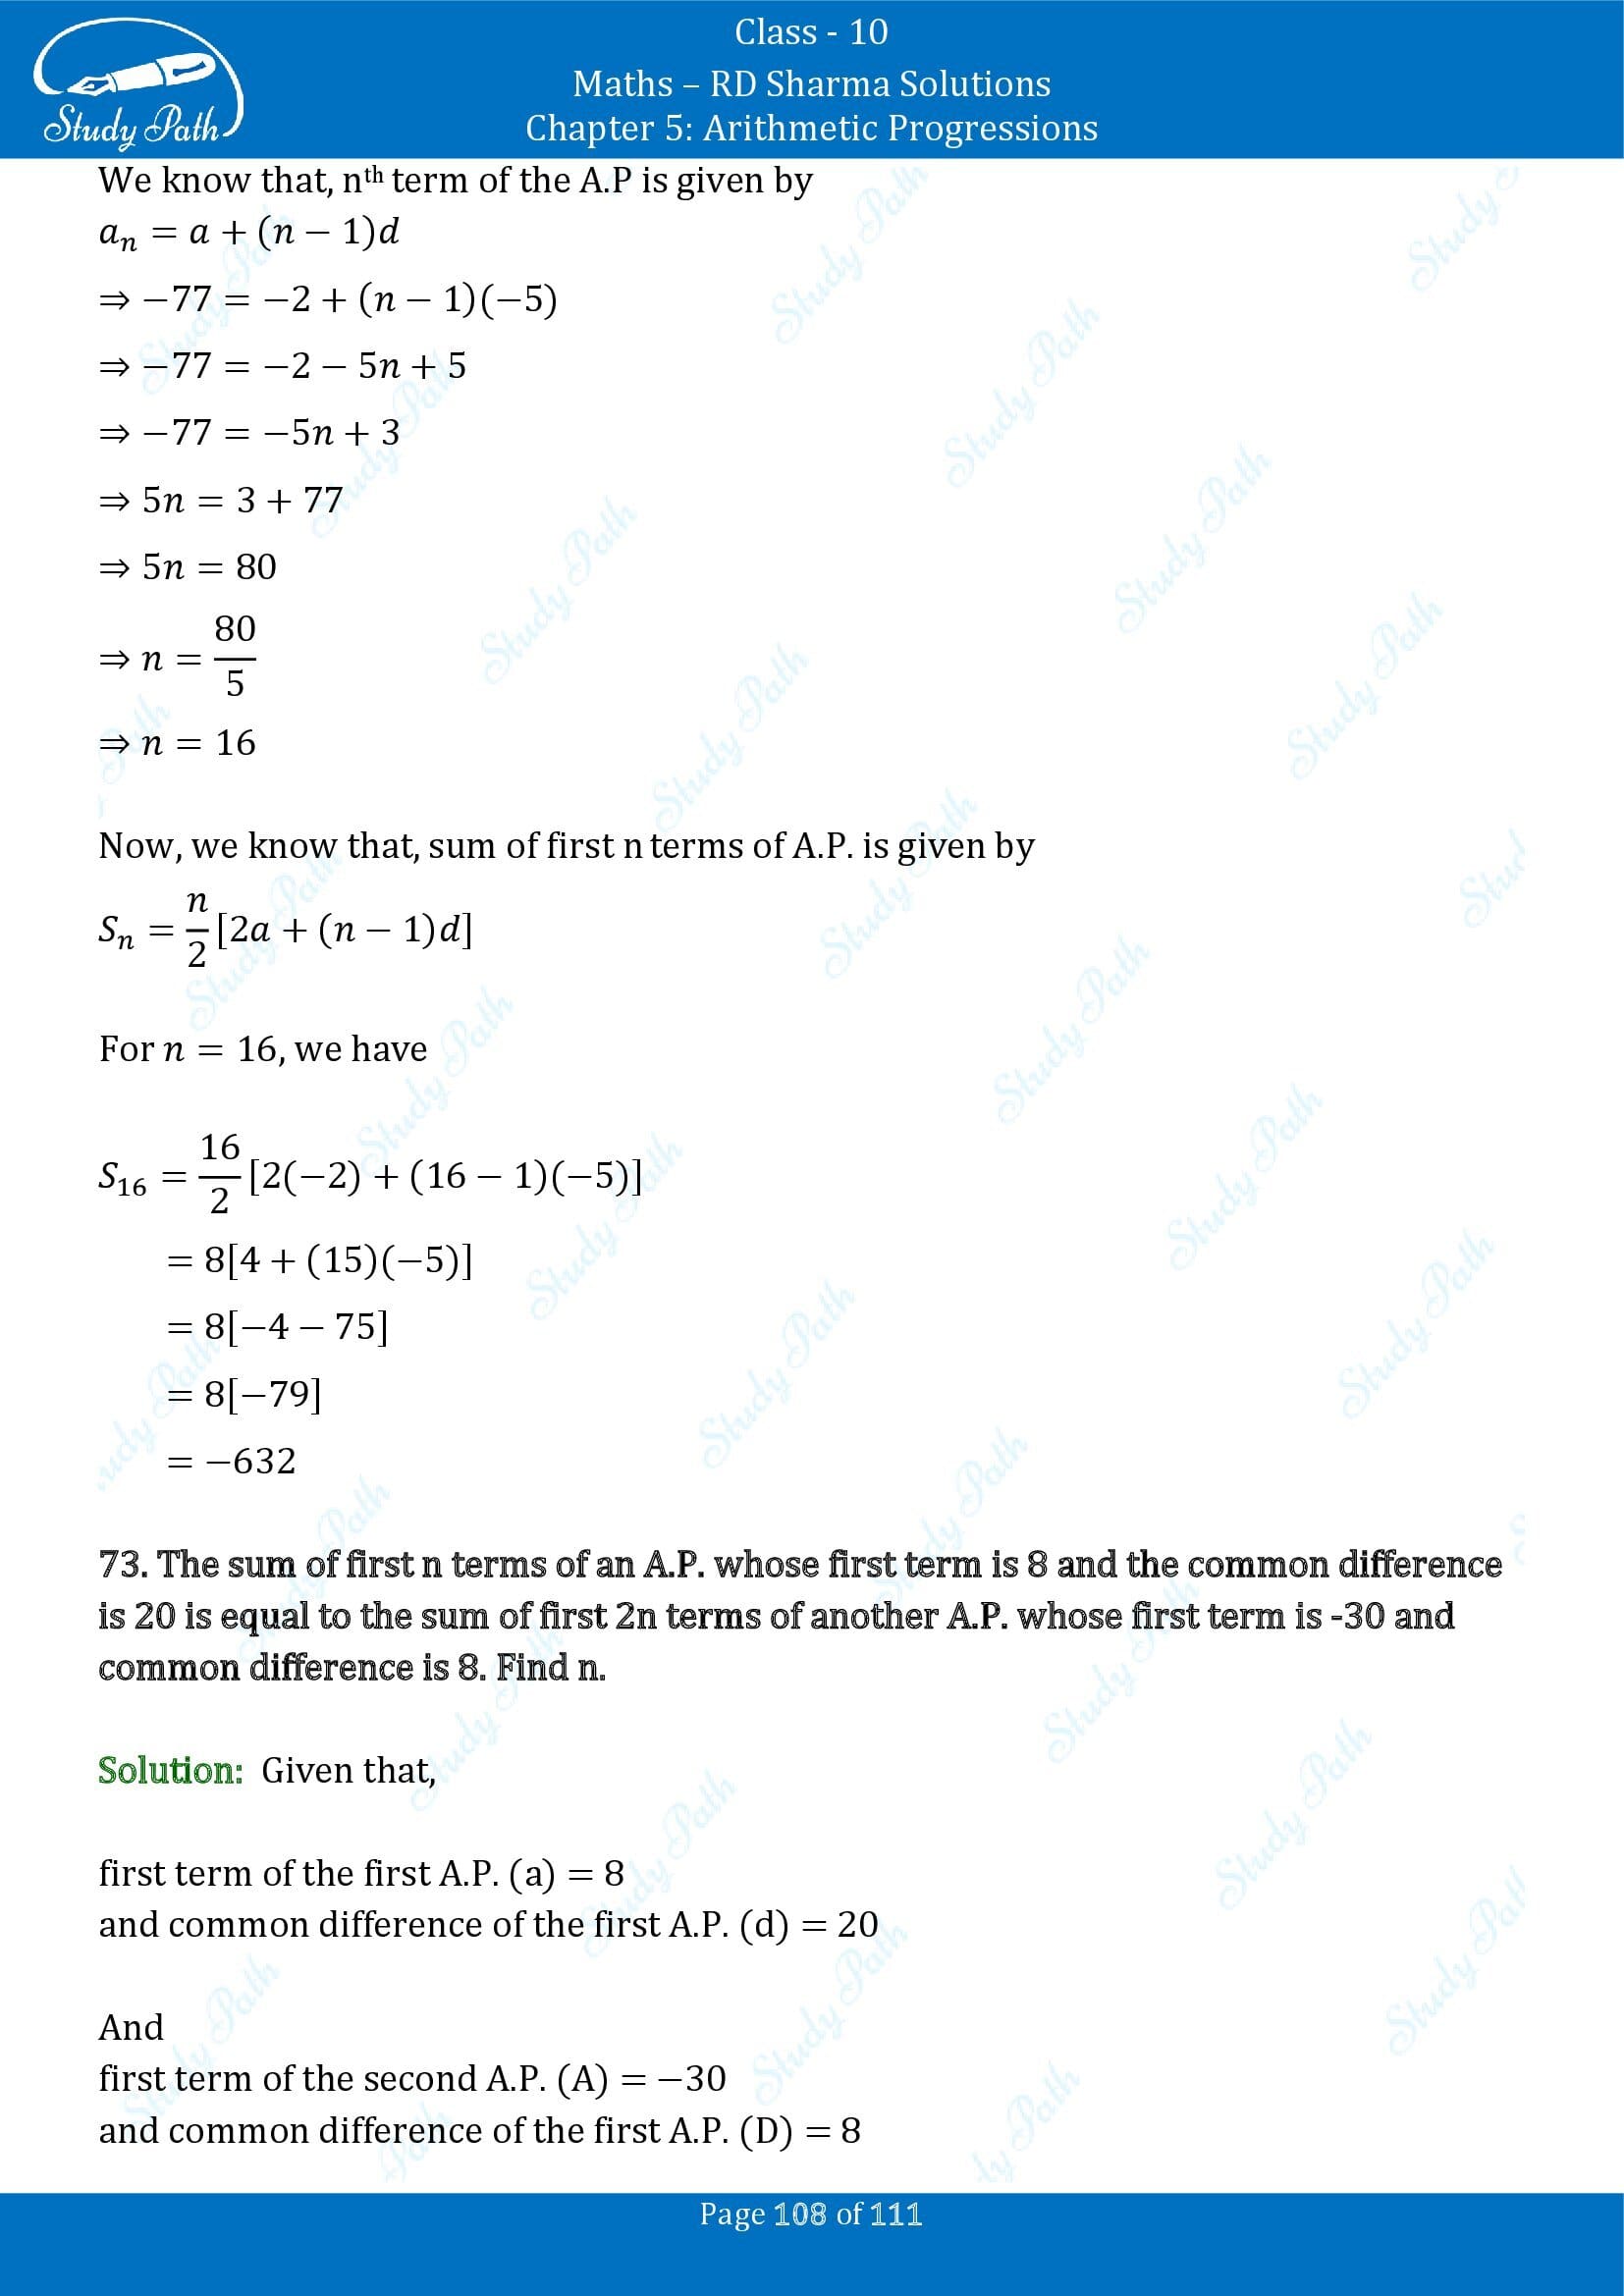 RD Sharma Solutions Class 10 Chapter 5 Arithmetic Progressions Exercise 5.6 00108